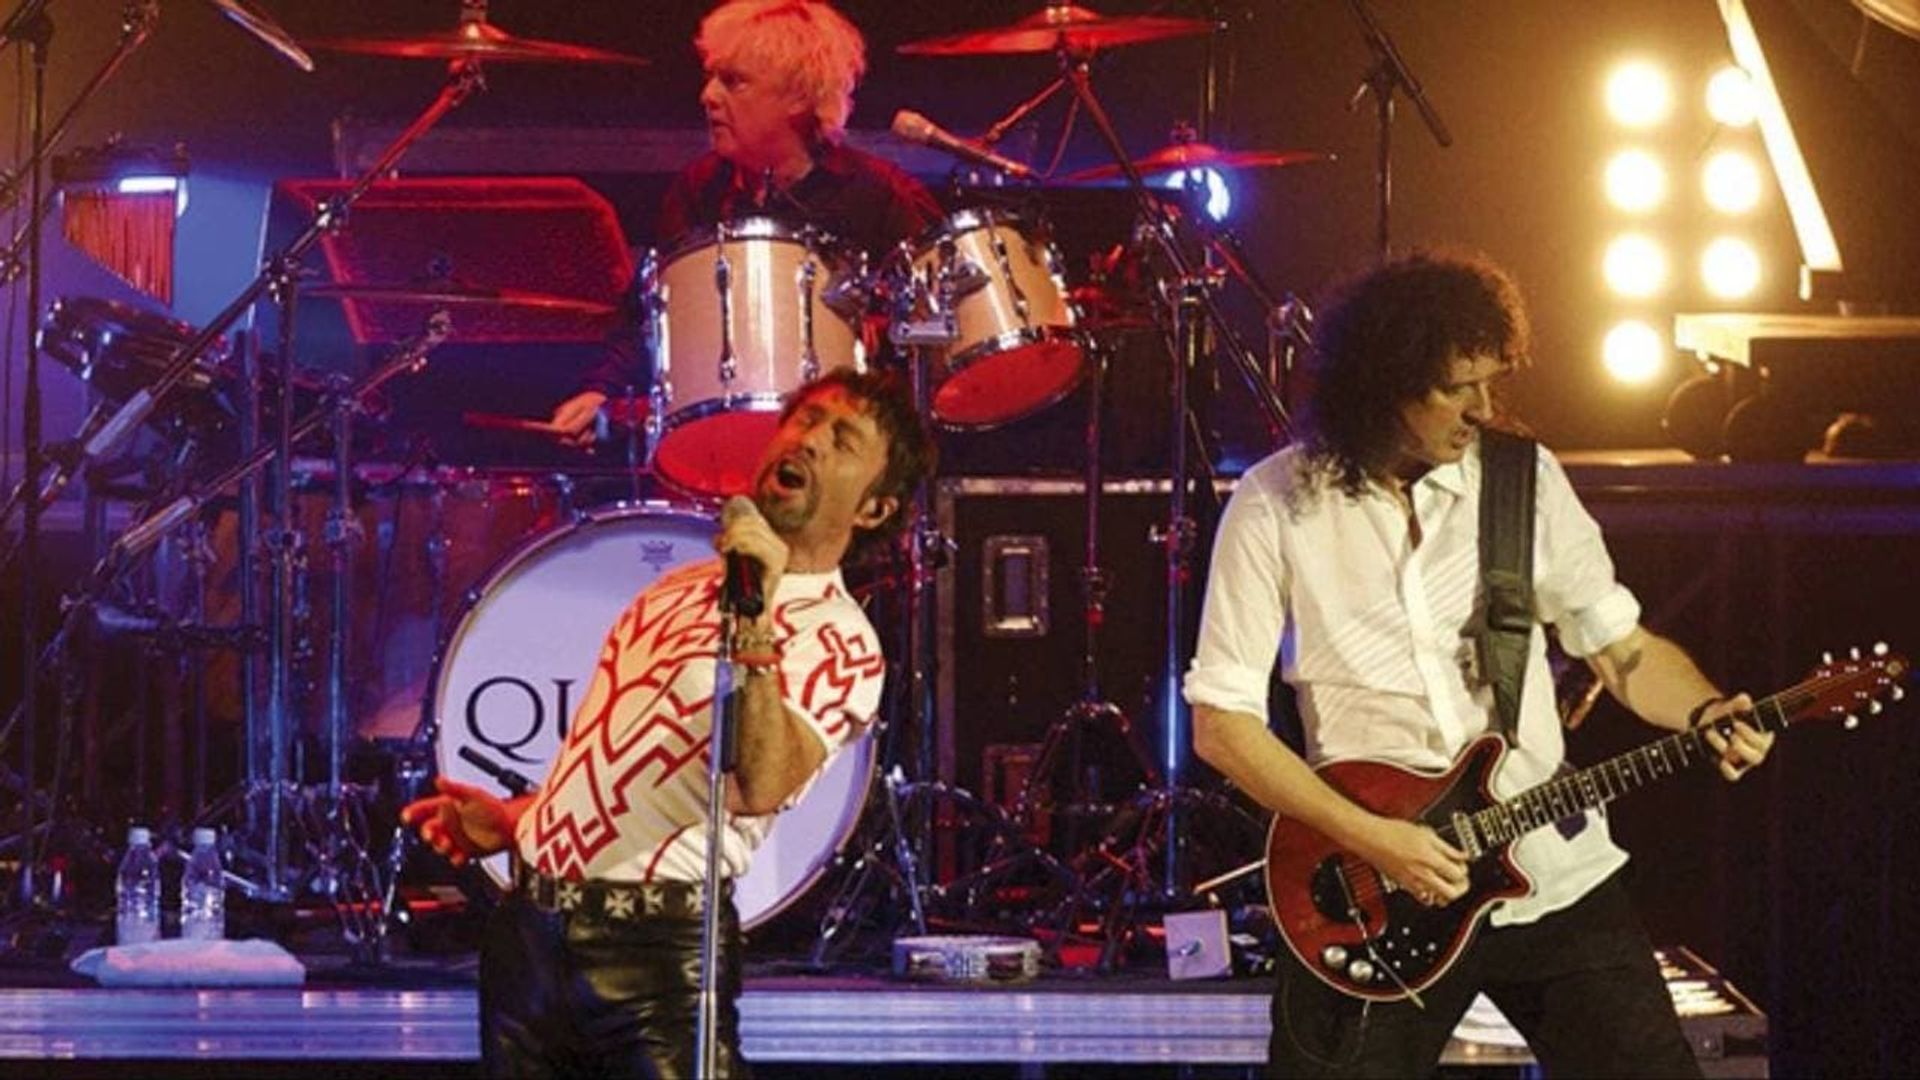 Queen + Paul Rodgers: Return of the Champions background